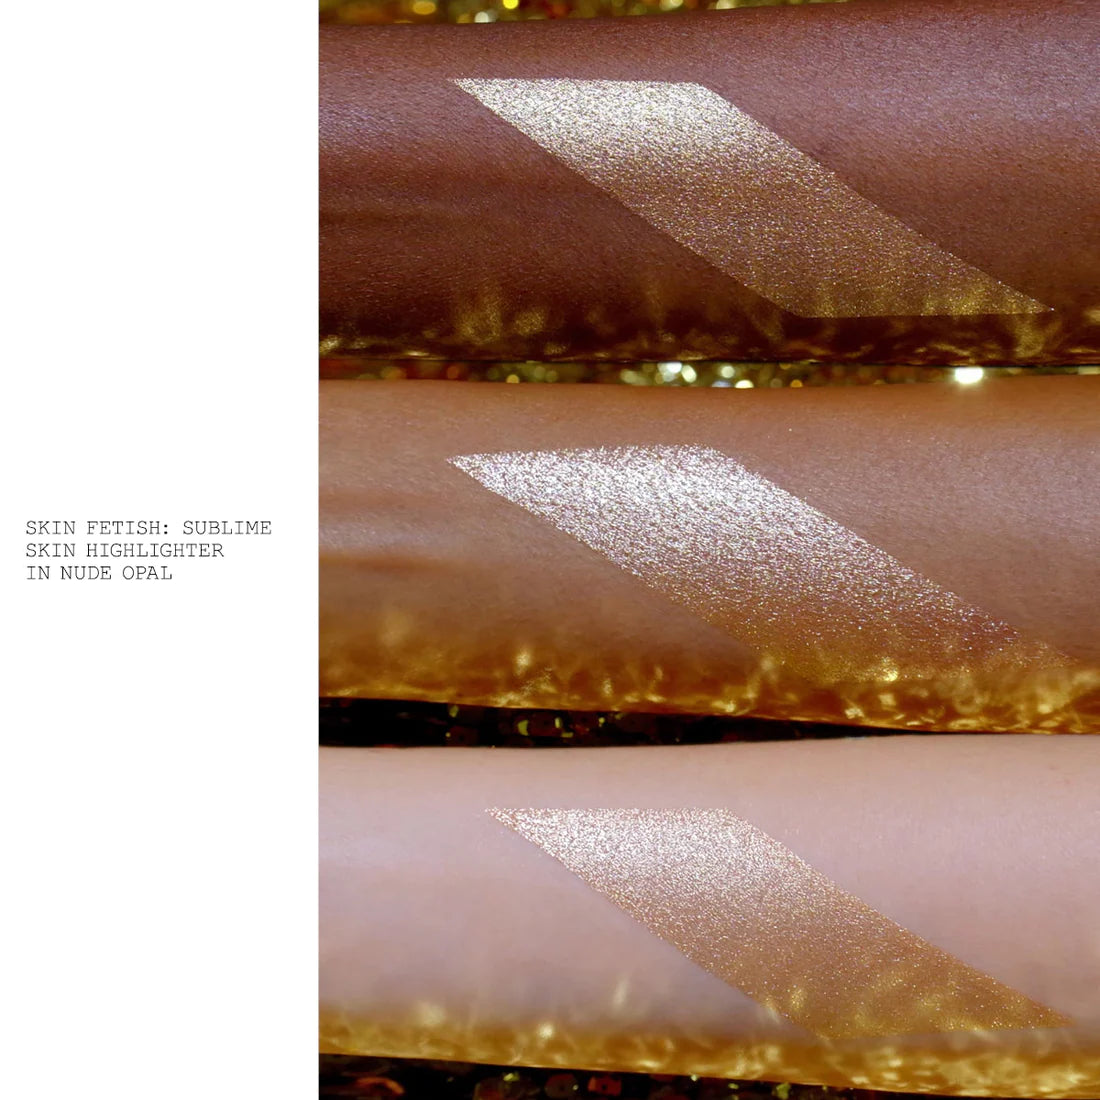 Pat McGrath Skin Fetish Heart's Desire Edition: Sublime Skin Highlighter - Nude Opal (Coral Champagne with Iridescent Pearls)